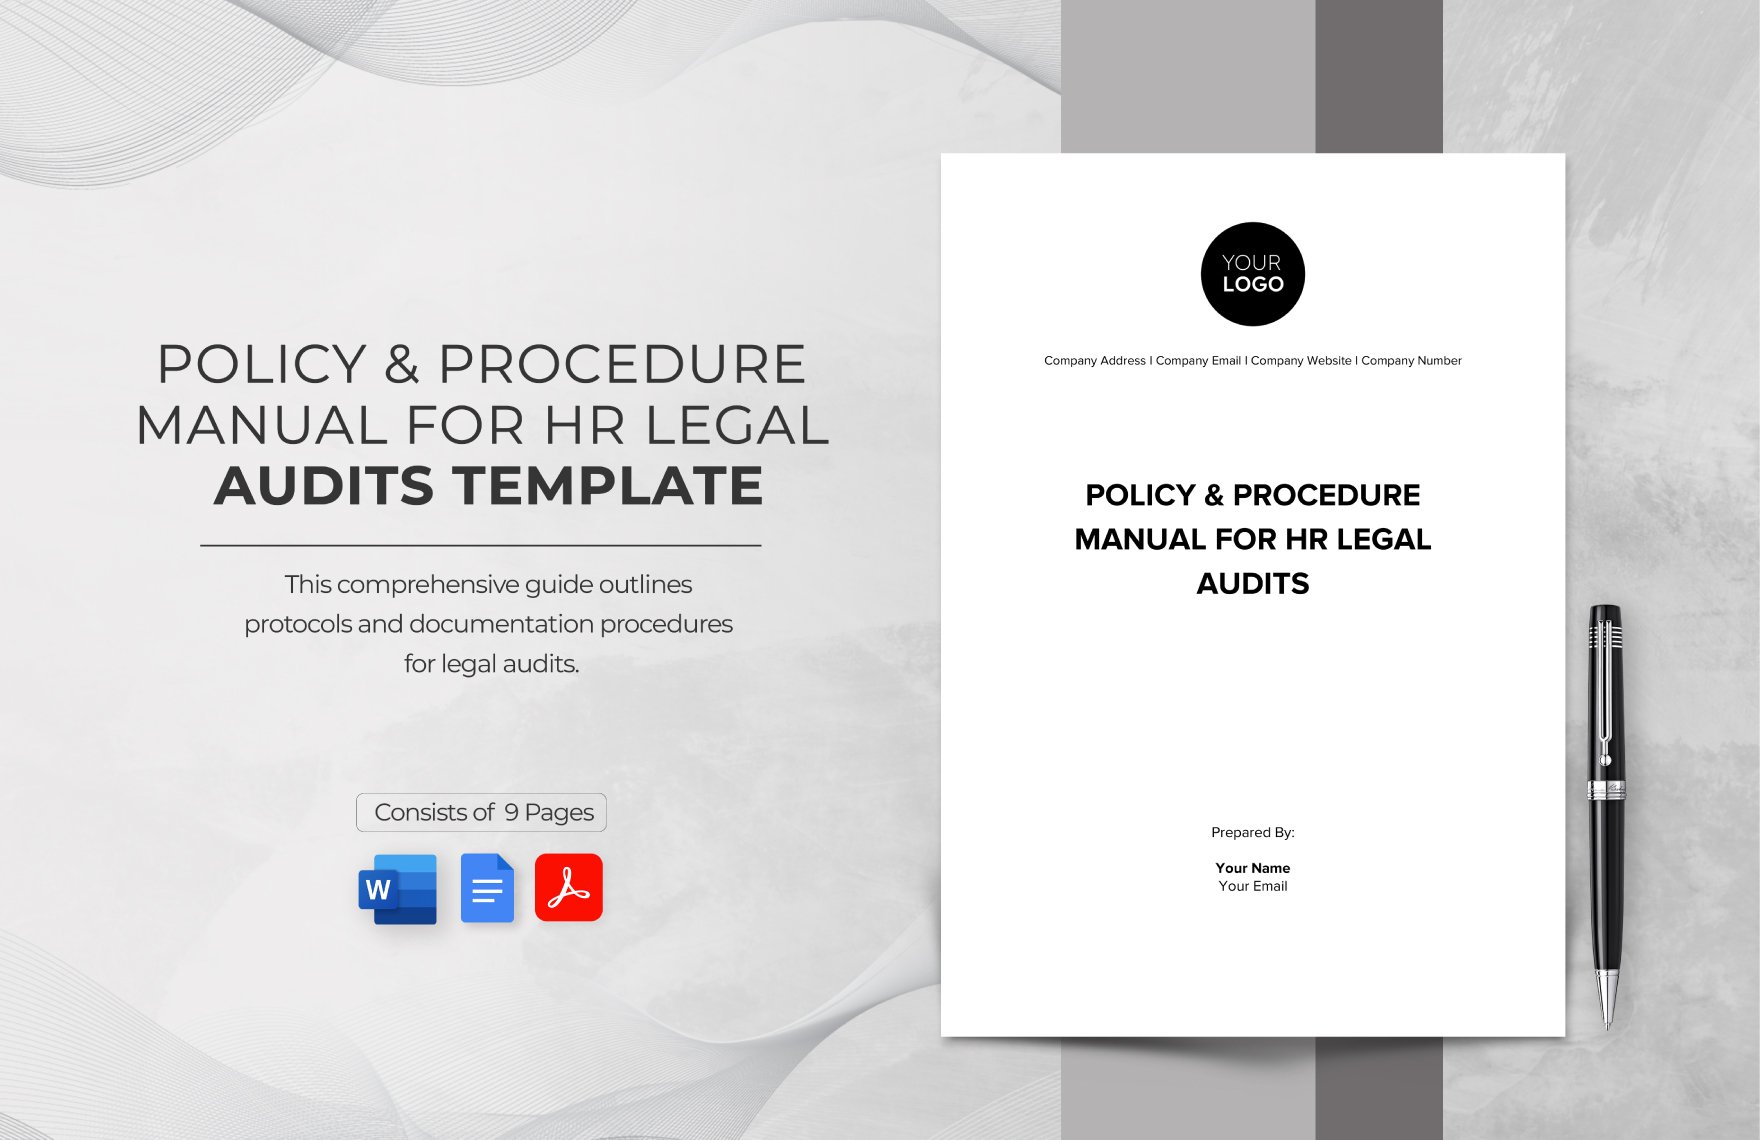 Policy & Procedure Manual for HR Legal Audits Template in Word, Google Docs, PDF